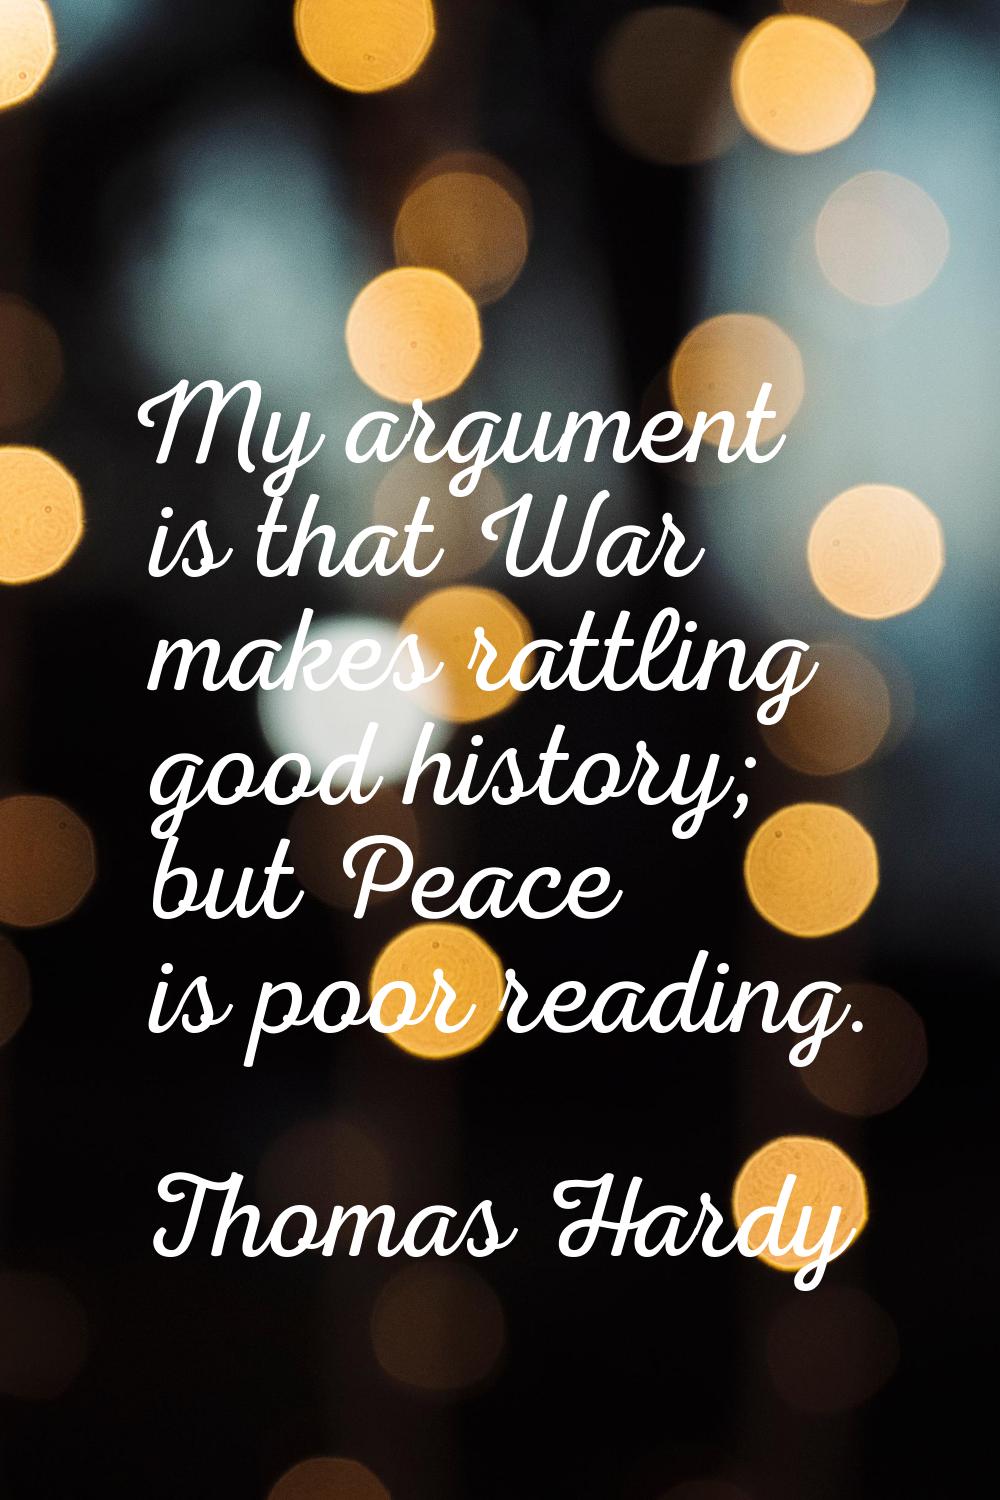 My argument is that War makes rattling good history; but Peace is poor reading.